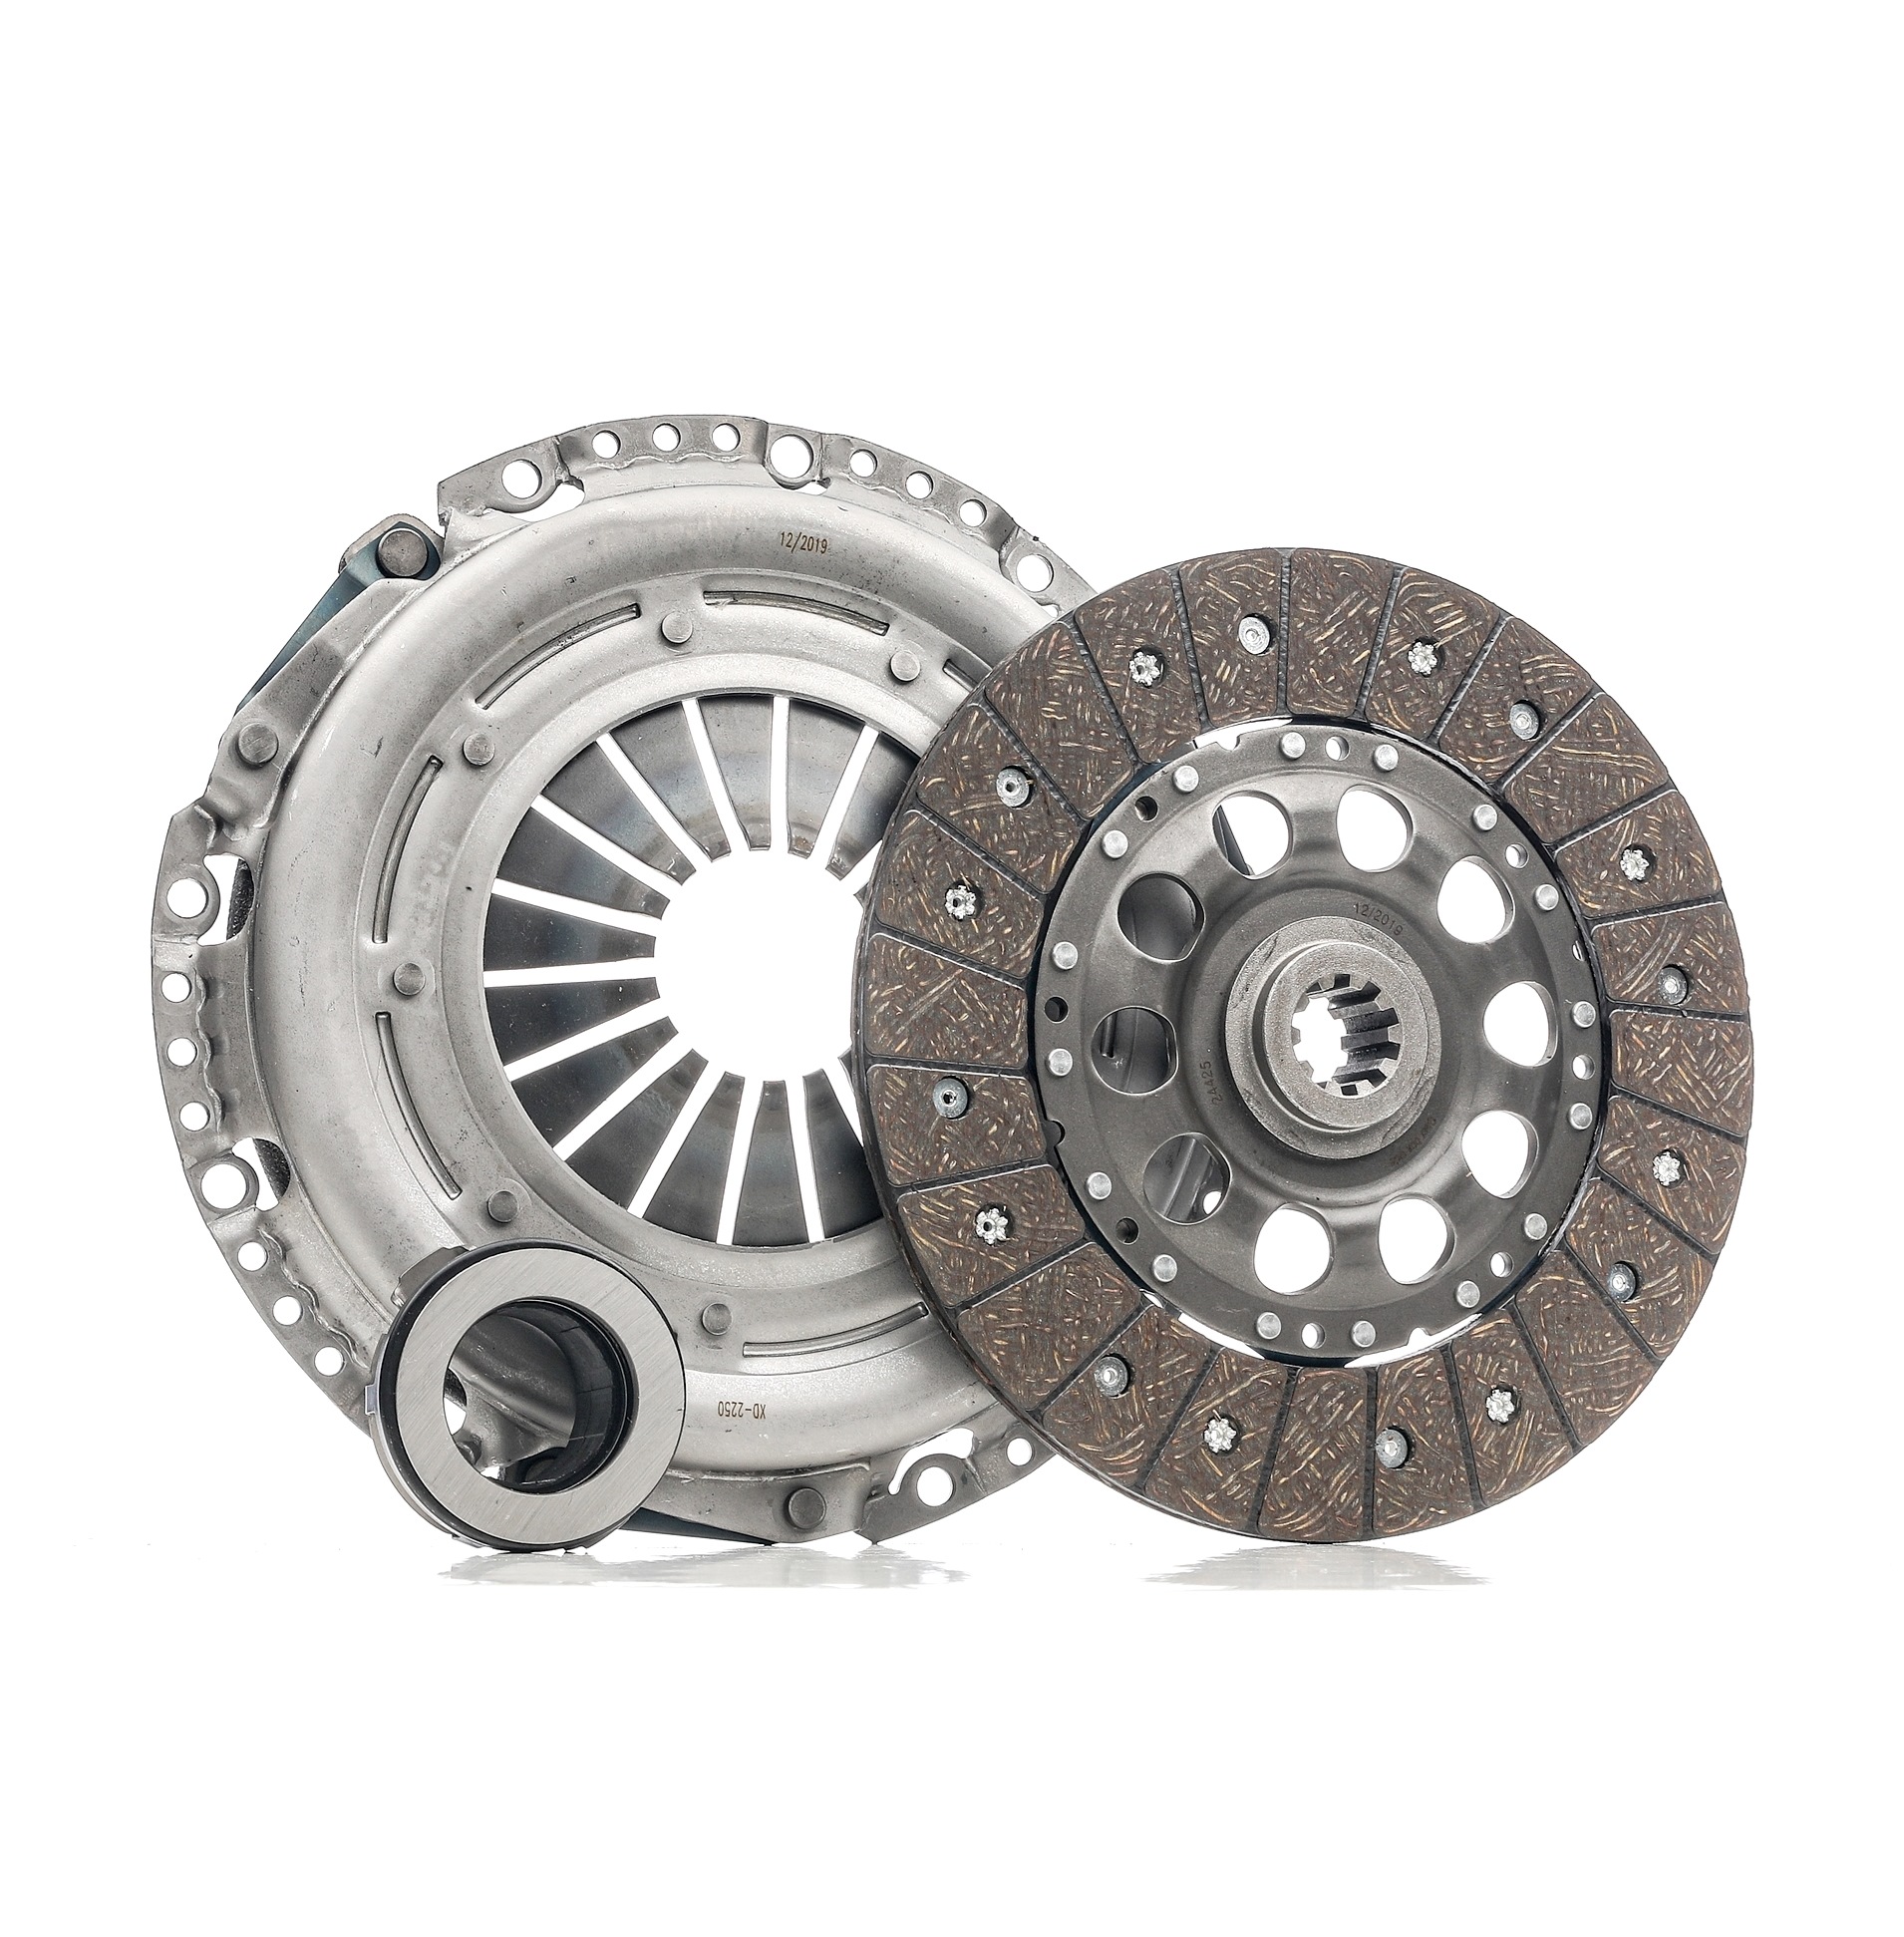 STATIM 100.810 Clutch kit with clutch release bearing, 240mm